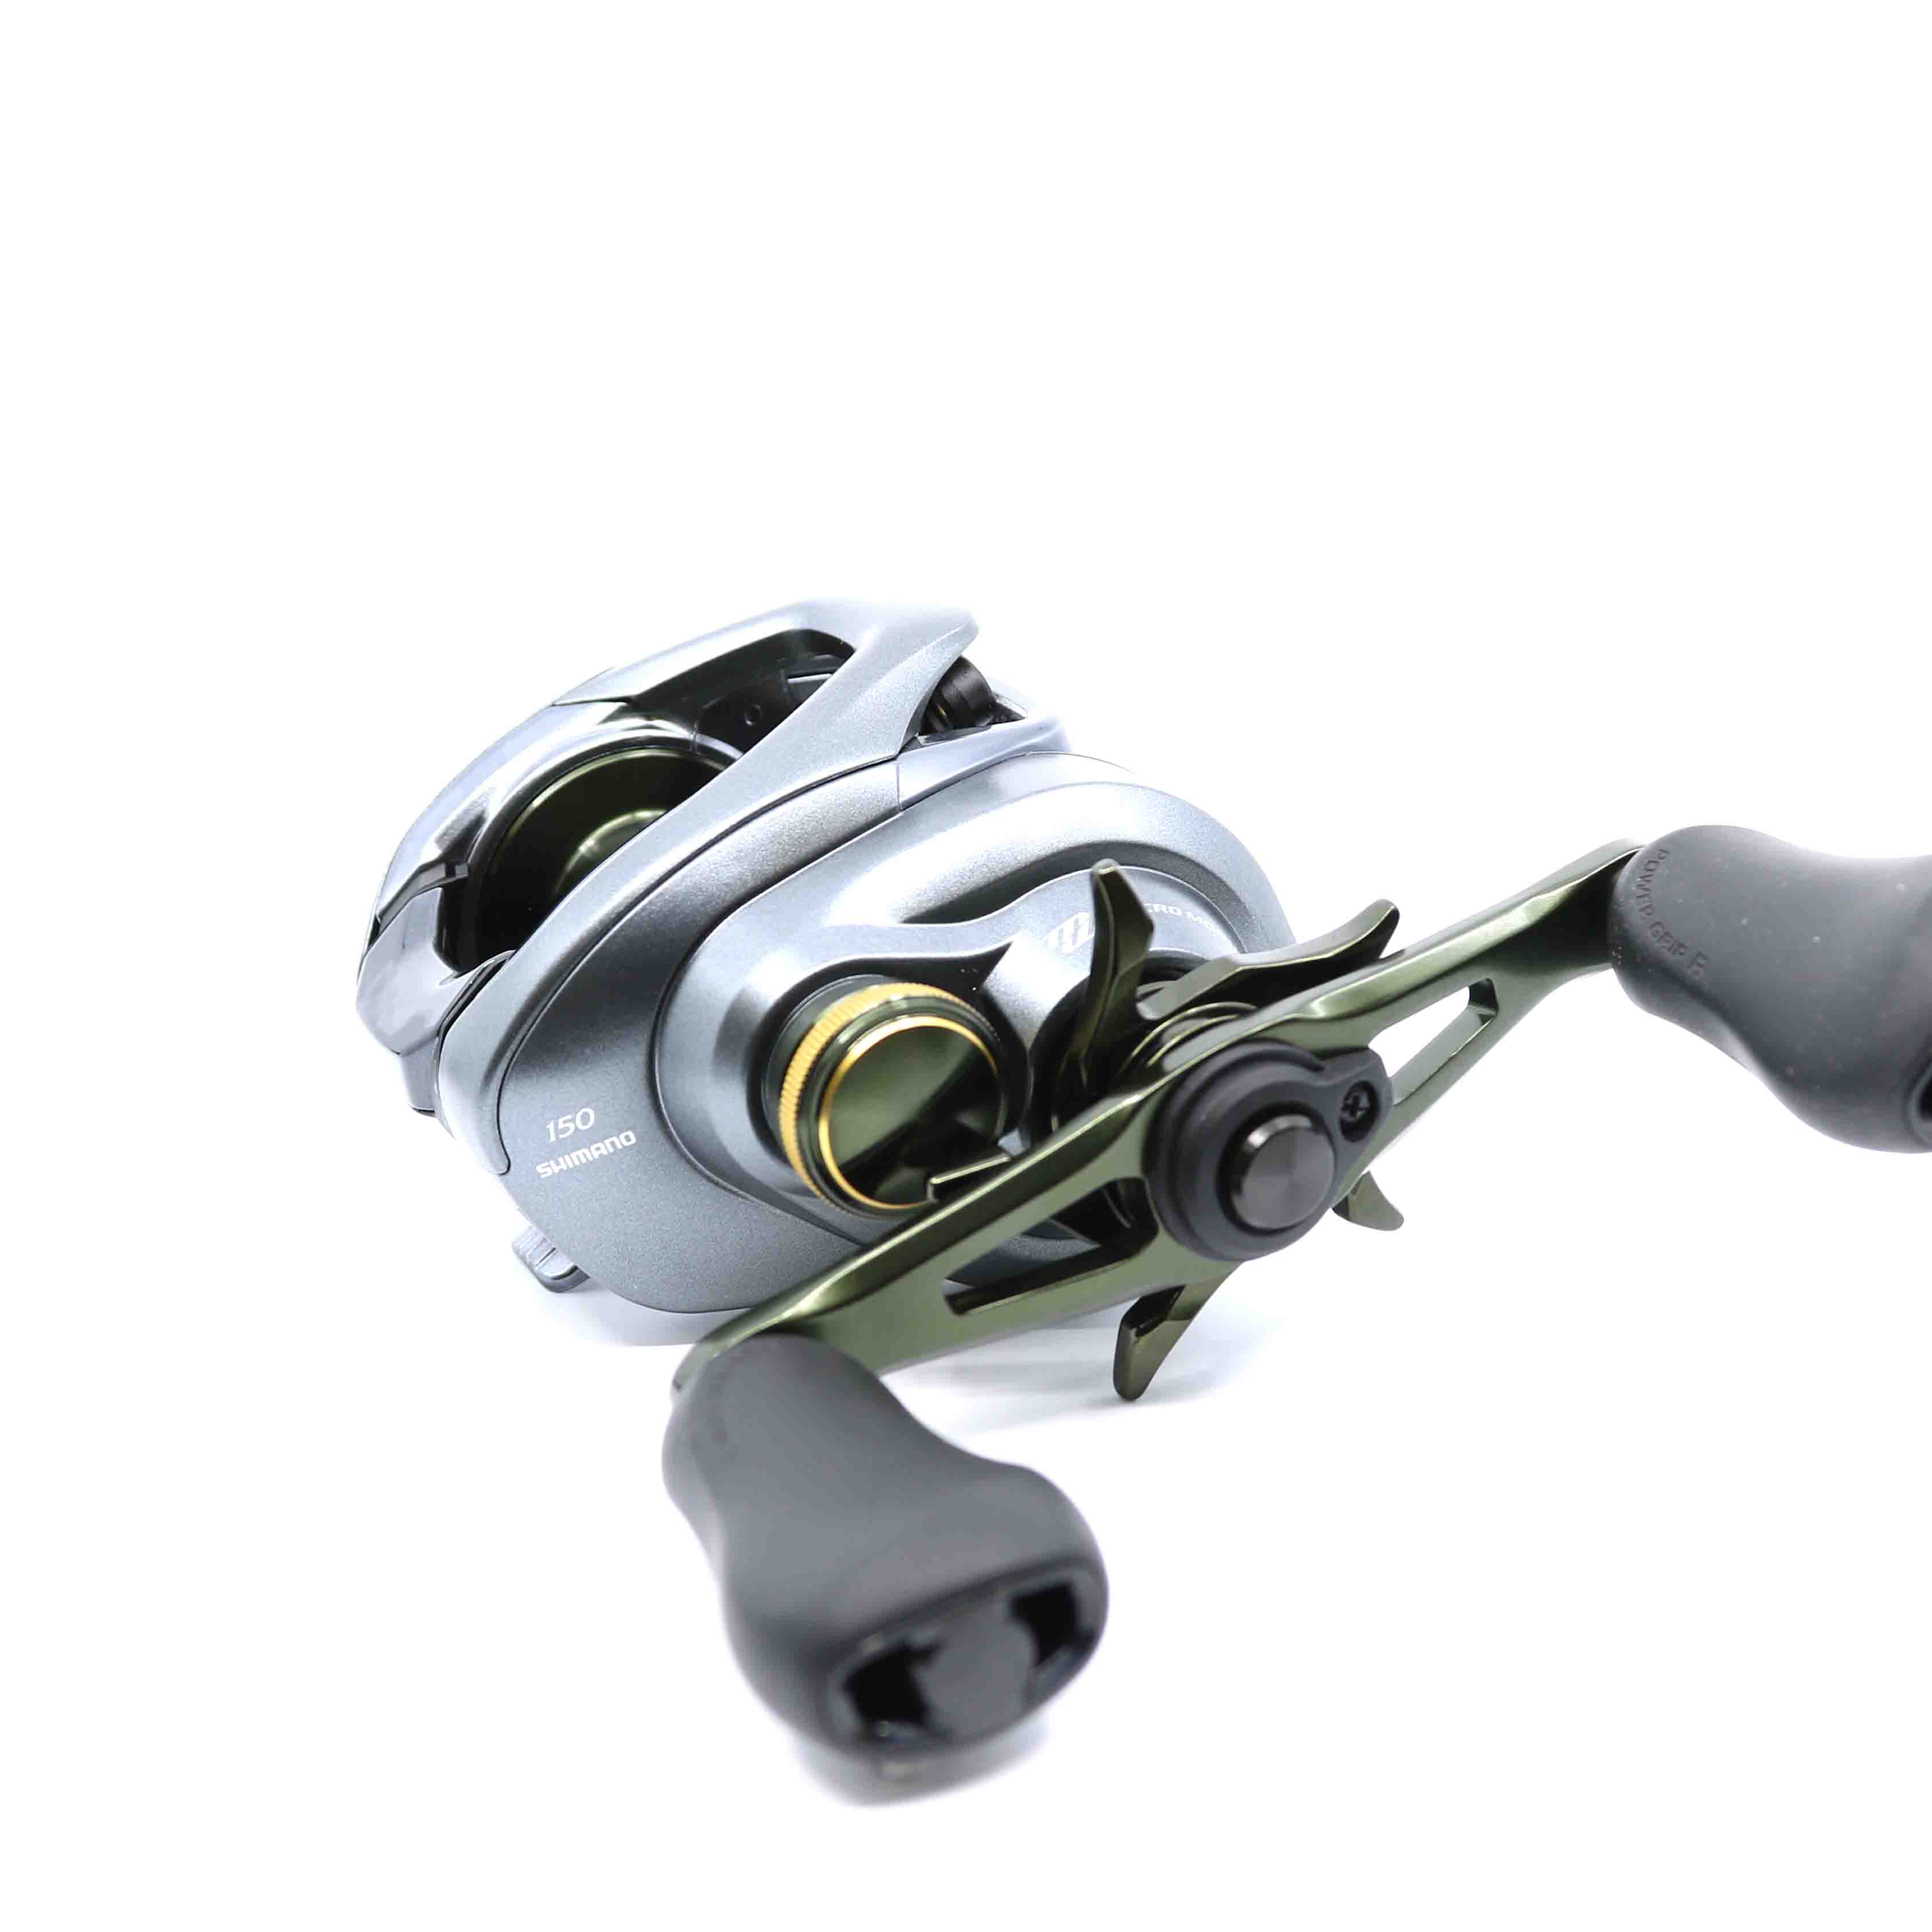 https://omnia-fishing.imgix.net/production/product_family_rotate_images/1718876831801/6900aa5615a9fbc939f4c7d1d922ee81.20_Shimano_Curado_DC.JPG?auto=format